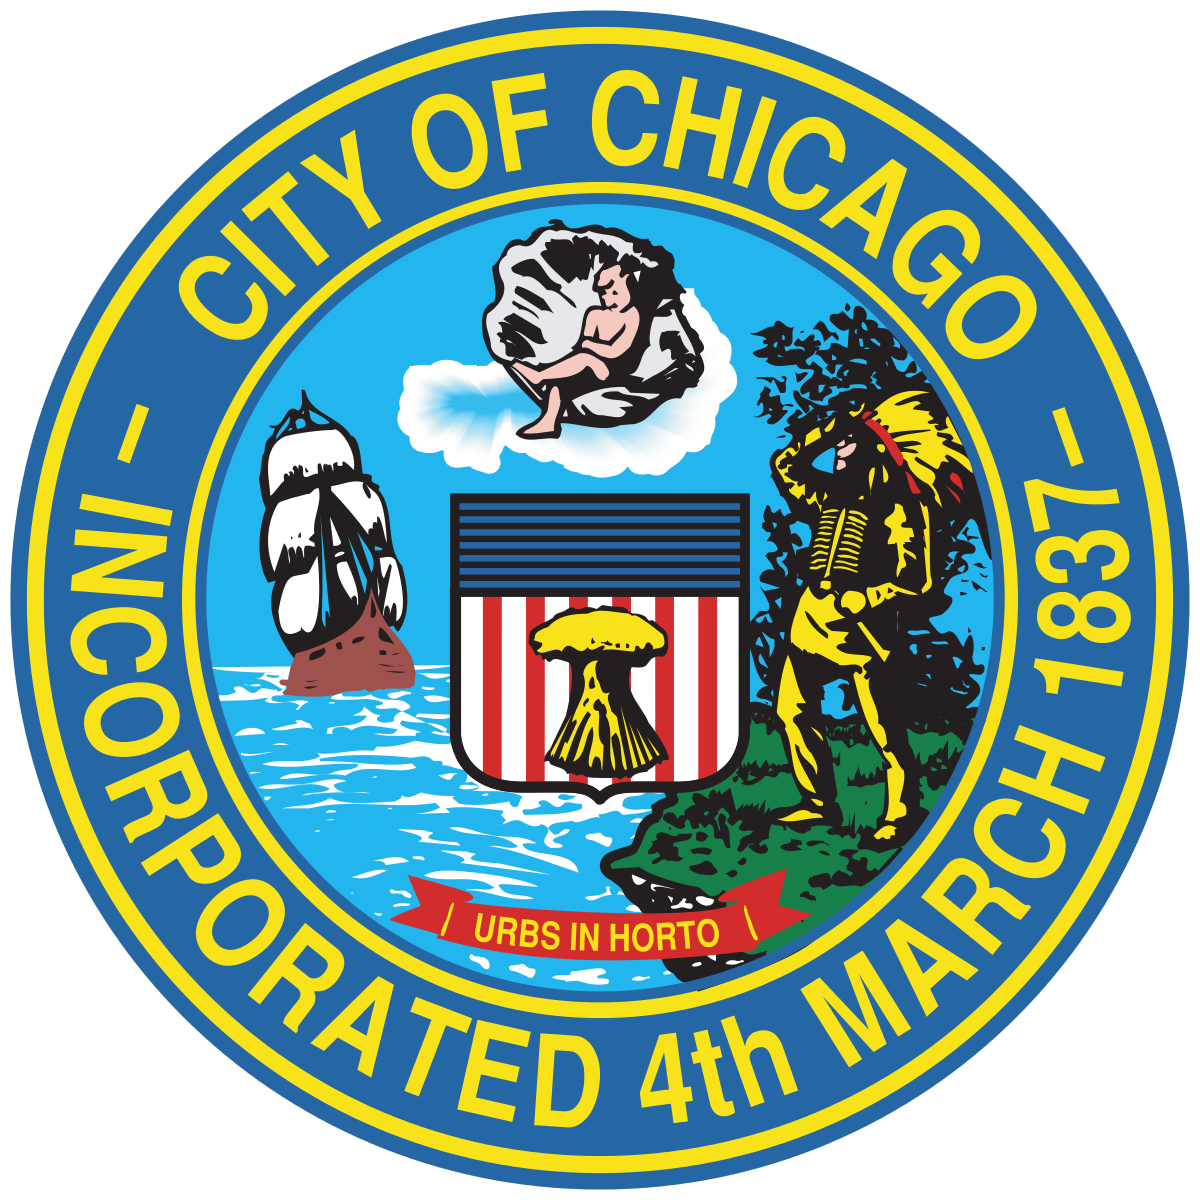 Chicago logo and seal